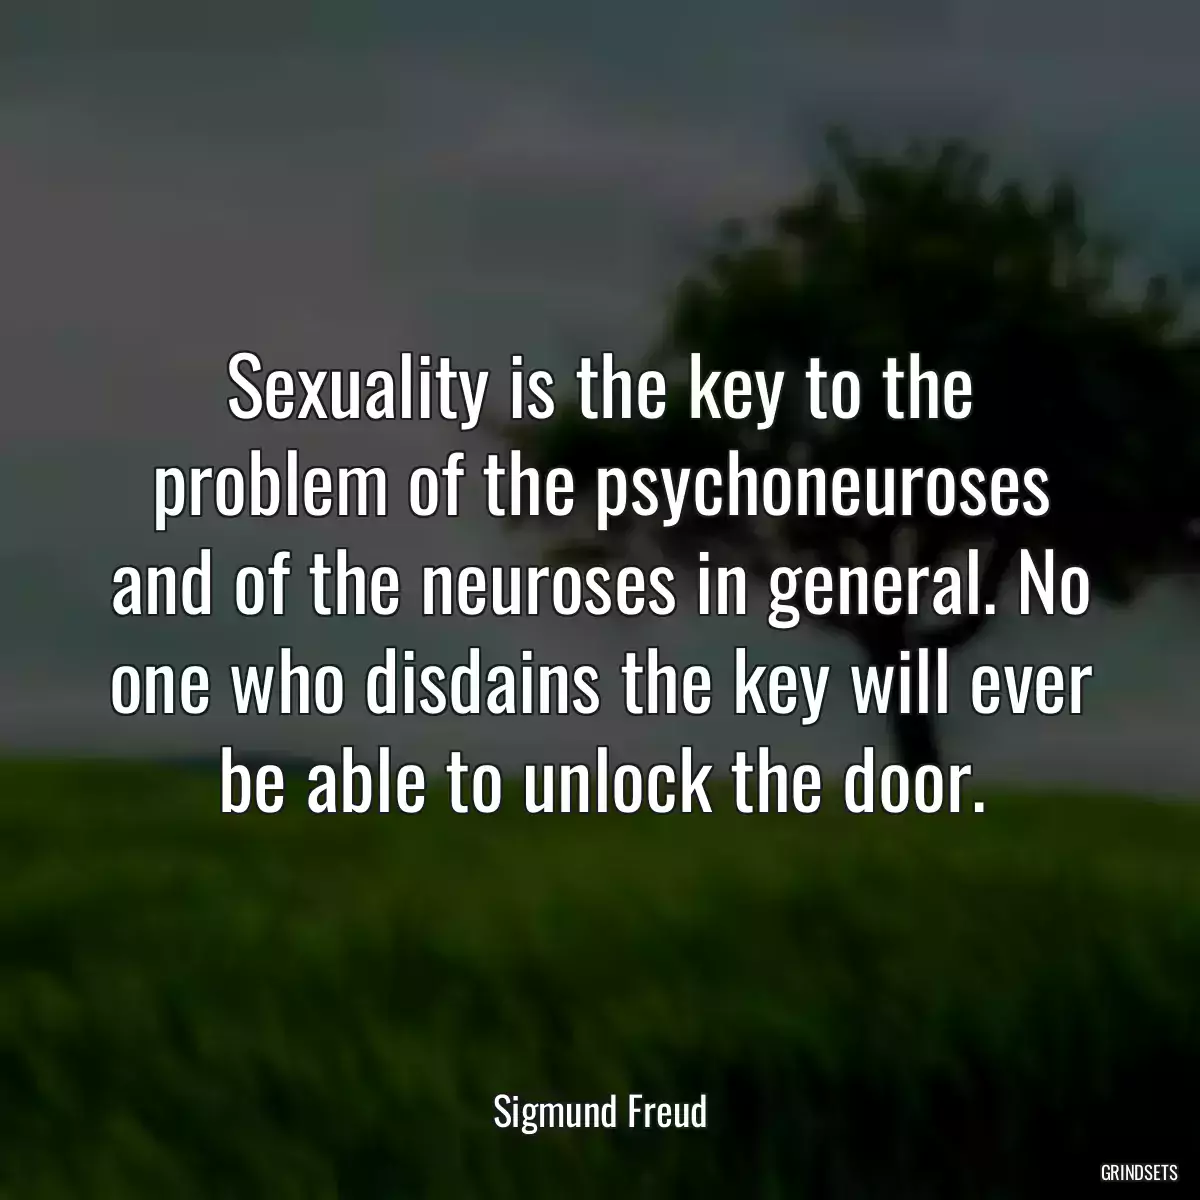 Sexuality is the key to the problem of the psychoneuroses and of the neuroses in general. No one who disdains the key will ever be able to unlock the door.